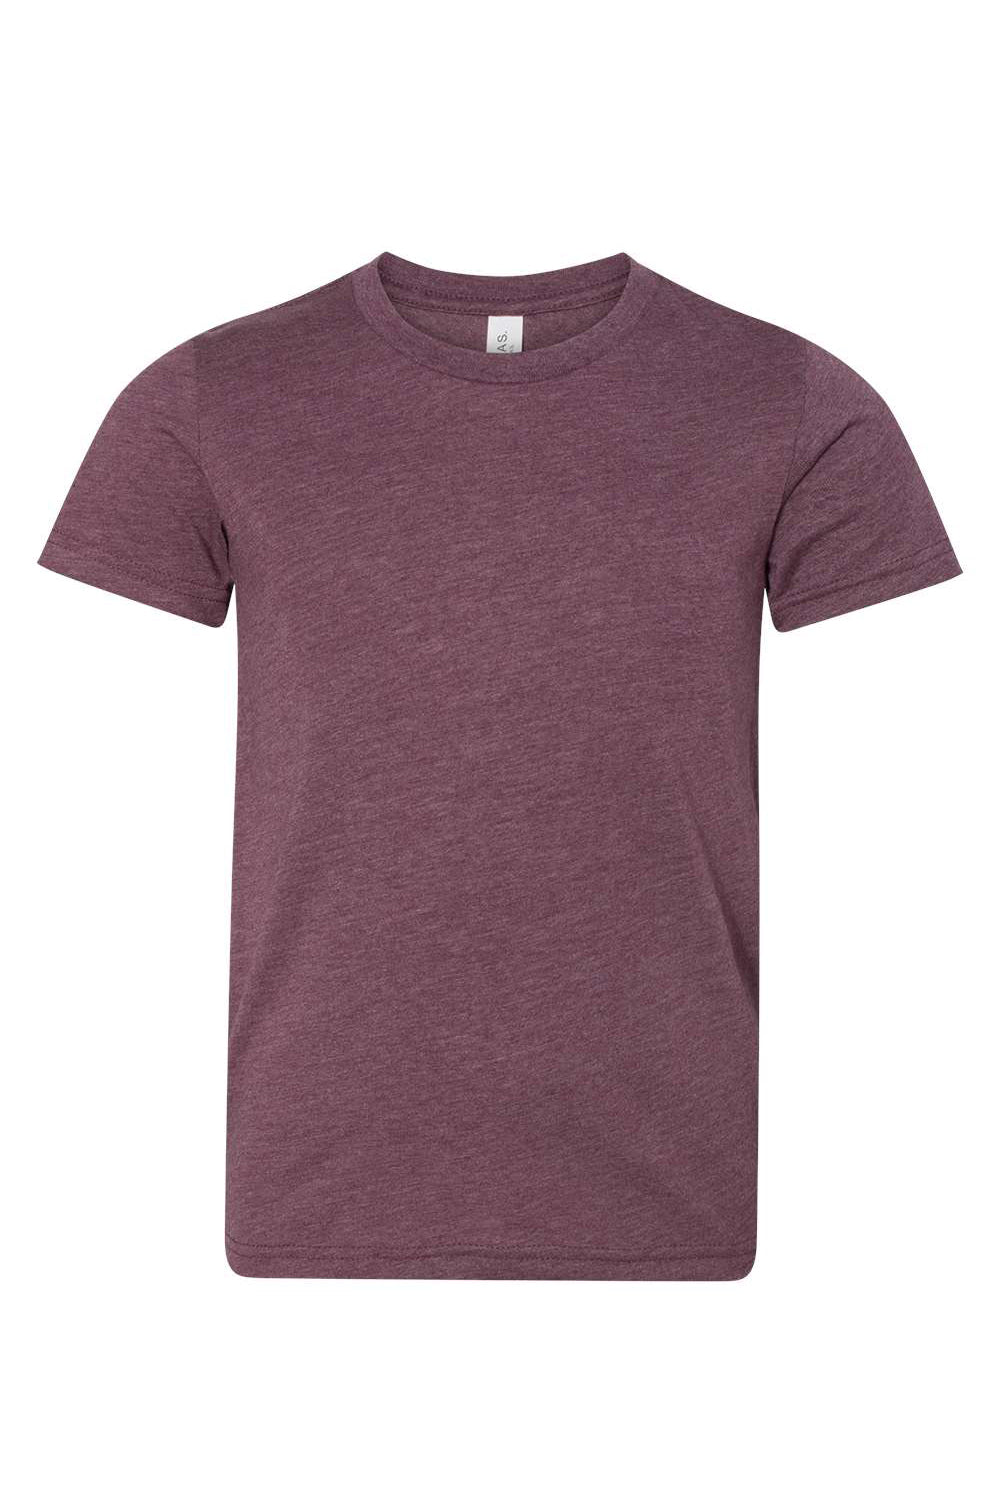 Bella + Canvas 3001Y Youth Jersey Short Sleeve Crewneck T-Shirt Heather Maroon Flat Front